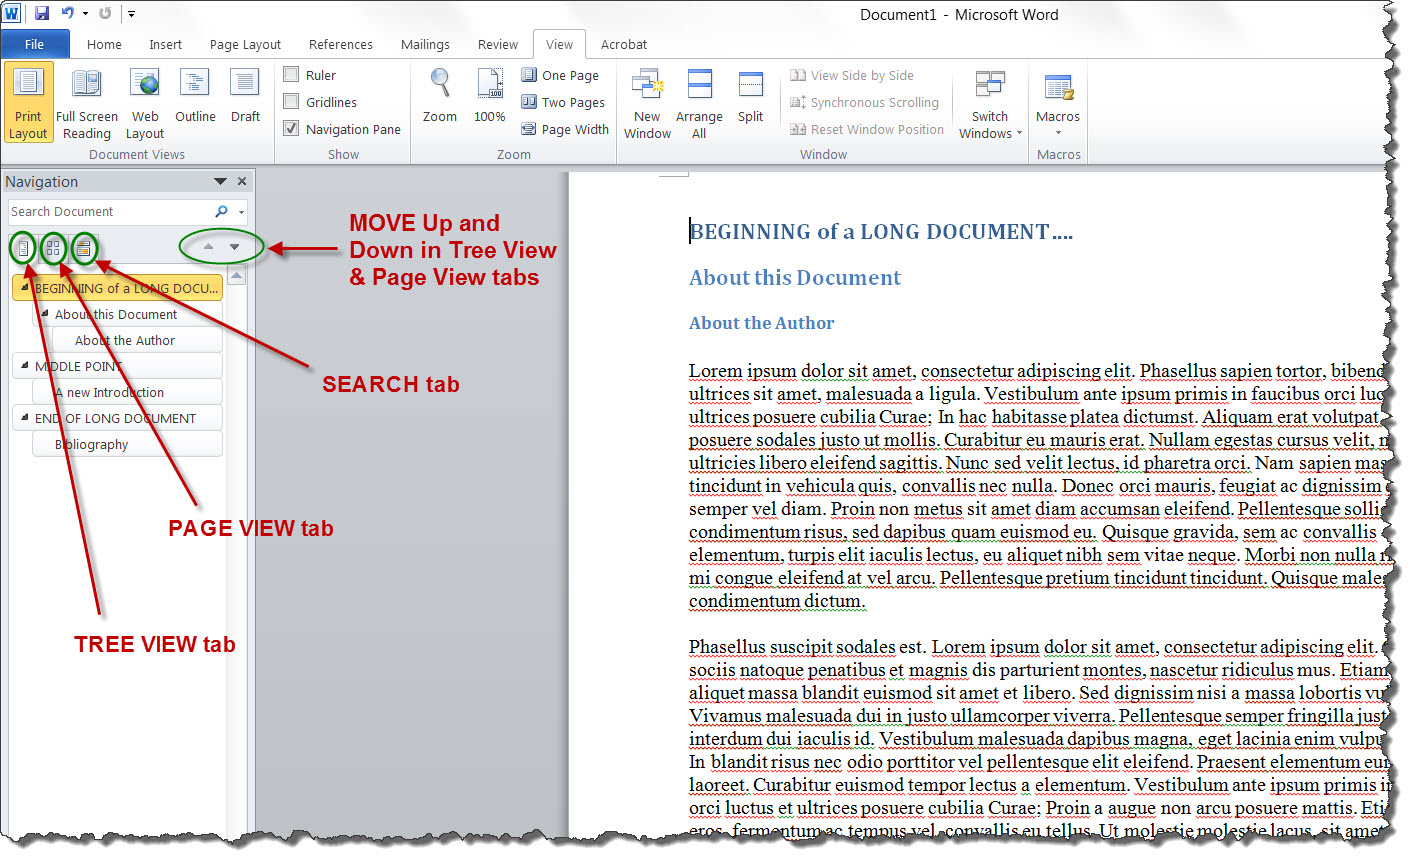 hot key for navigation pane in ms word on a mac